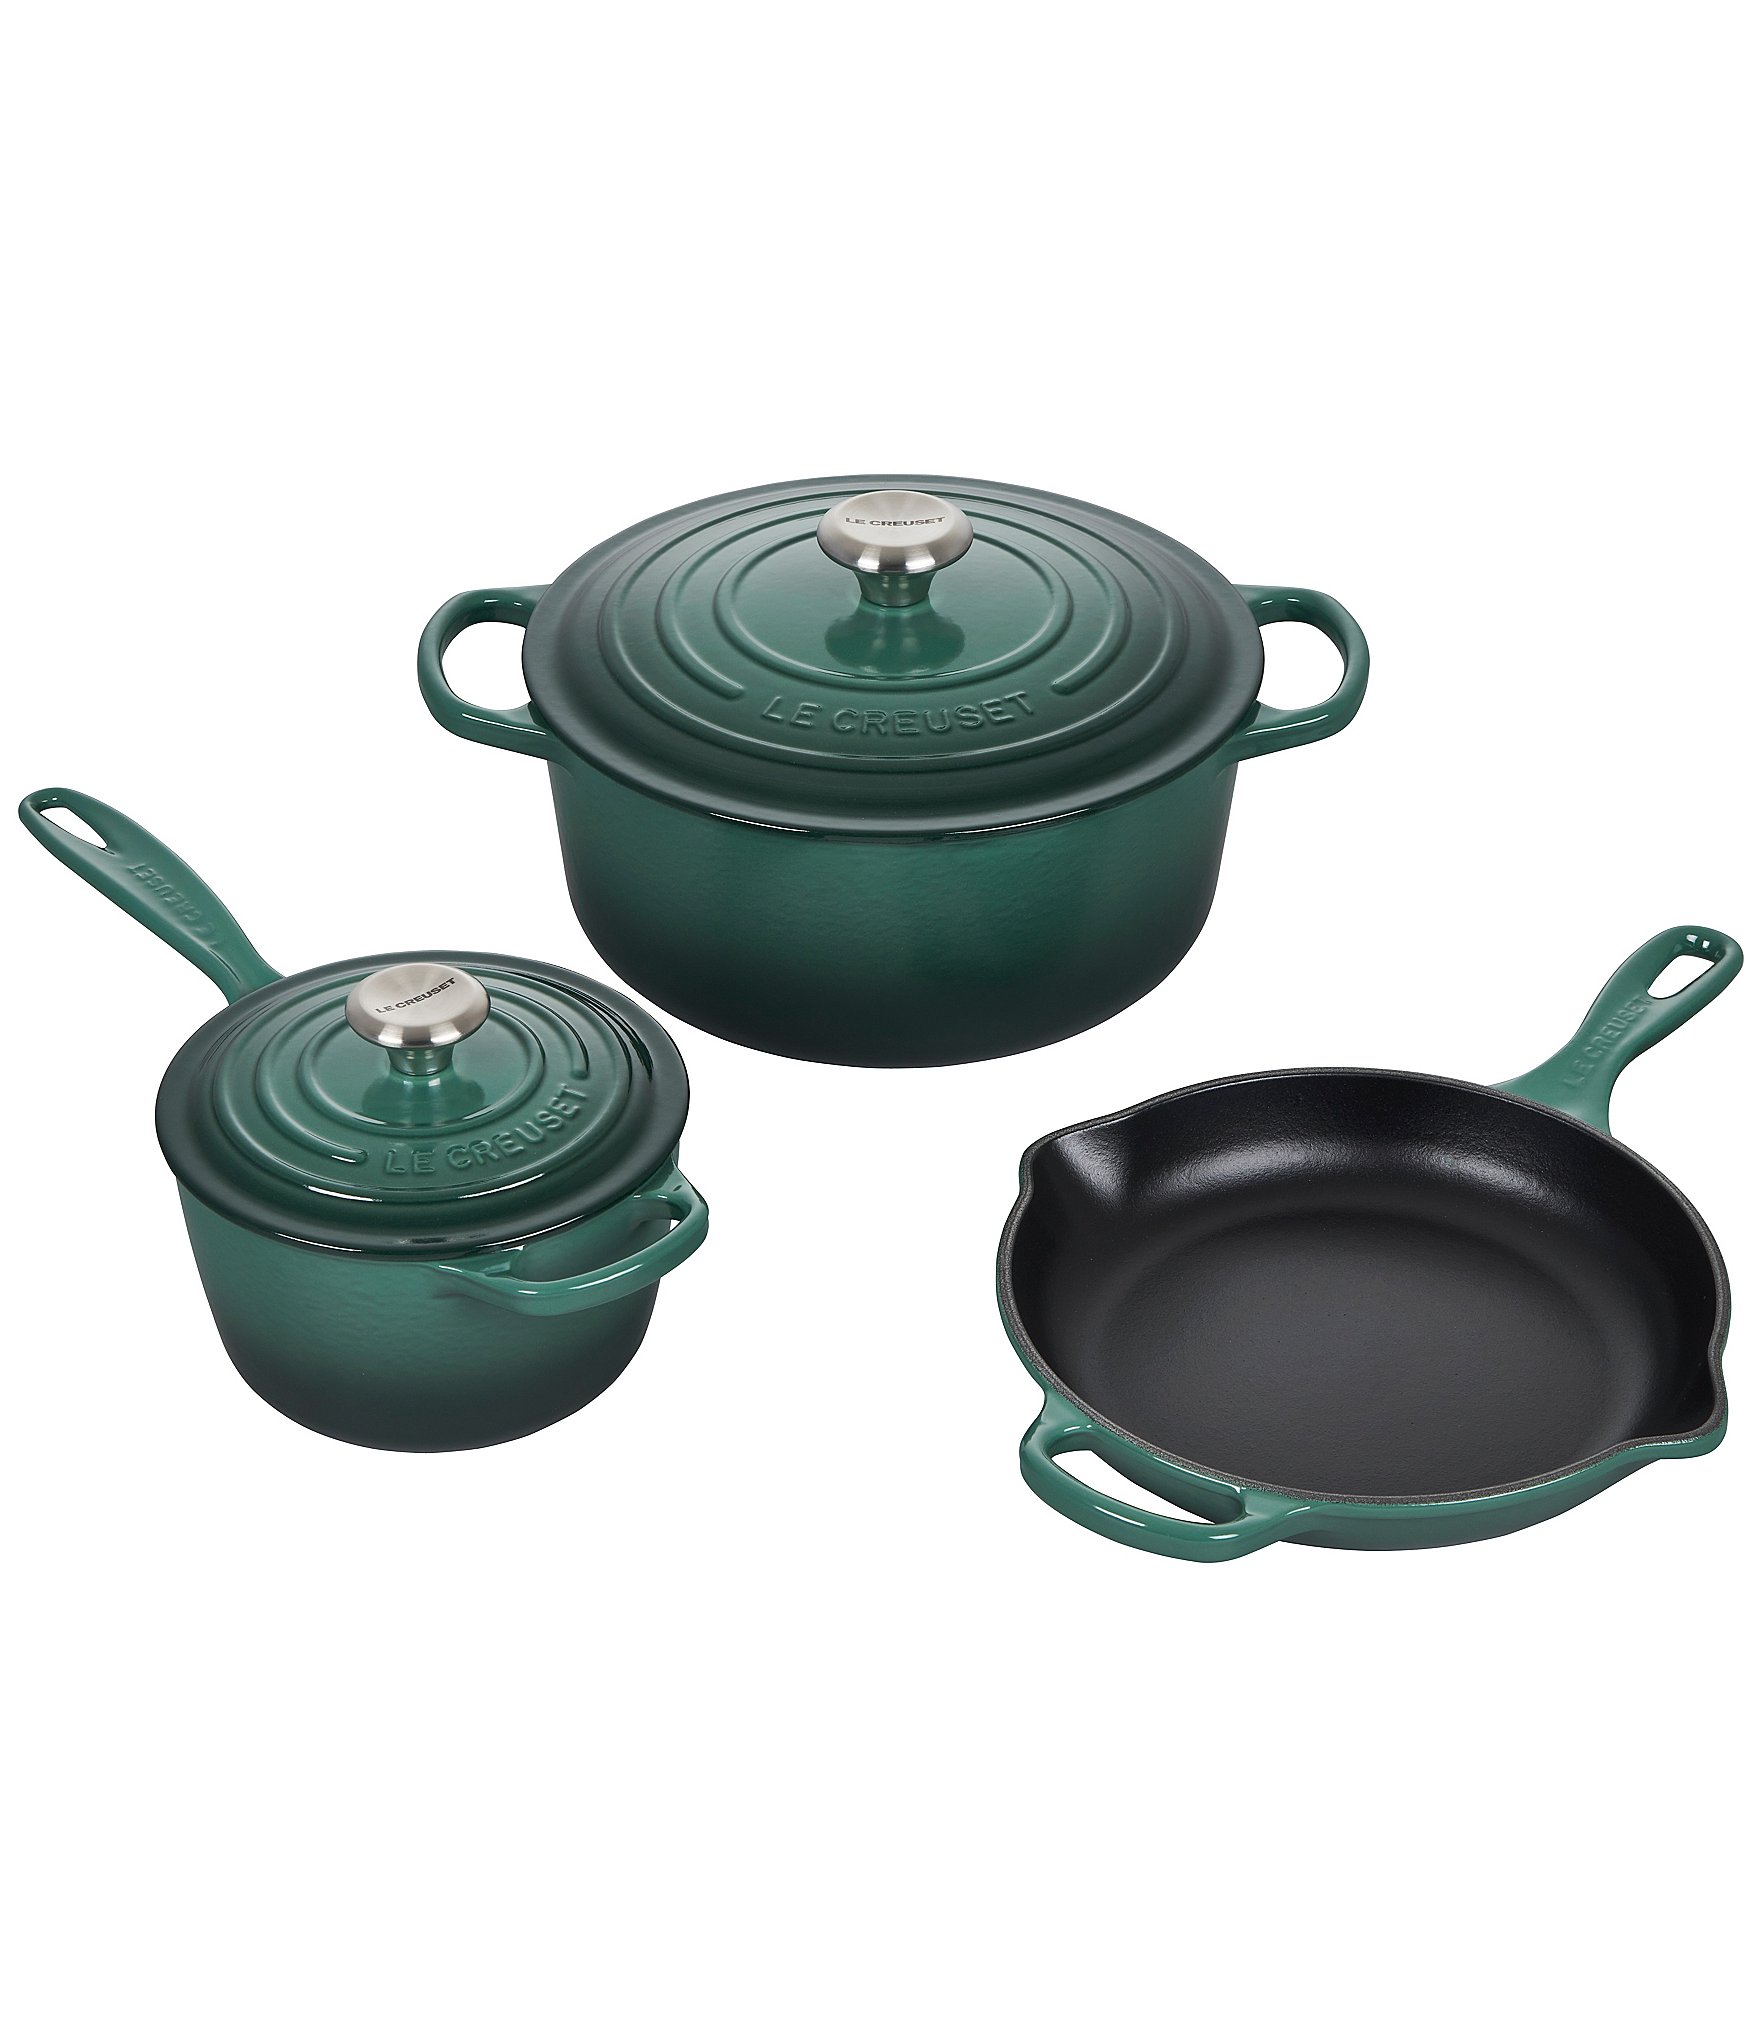 Le Creuset Signature Cast-Iron 5-Piece Cookware Set with Stainless ...